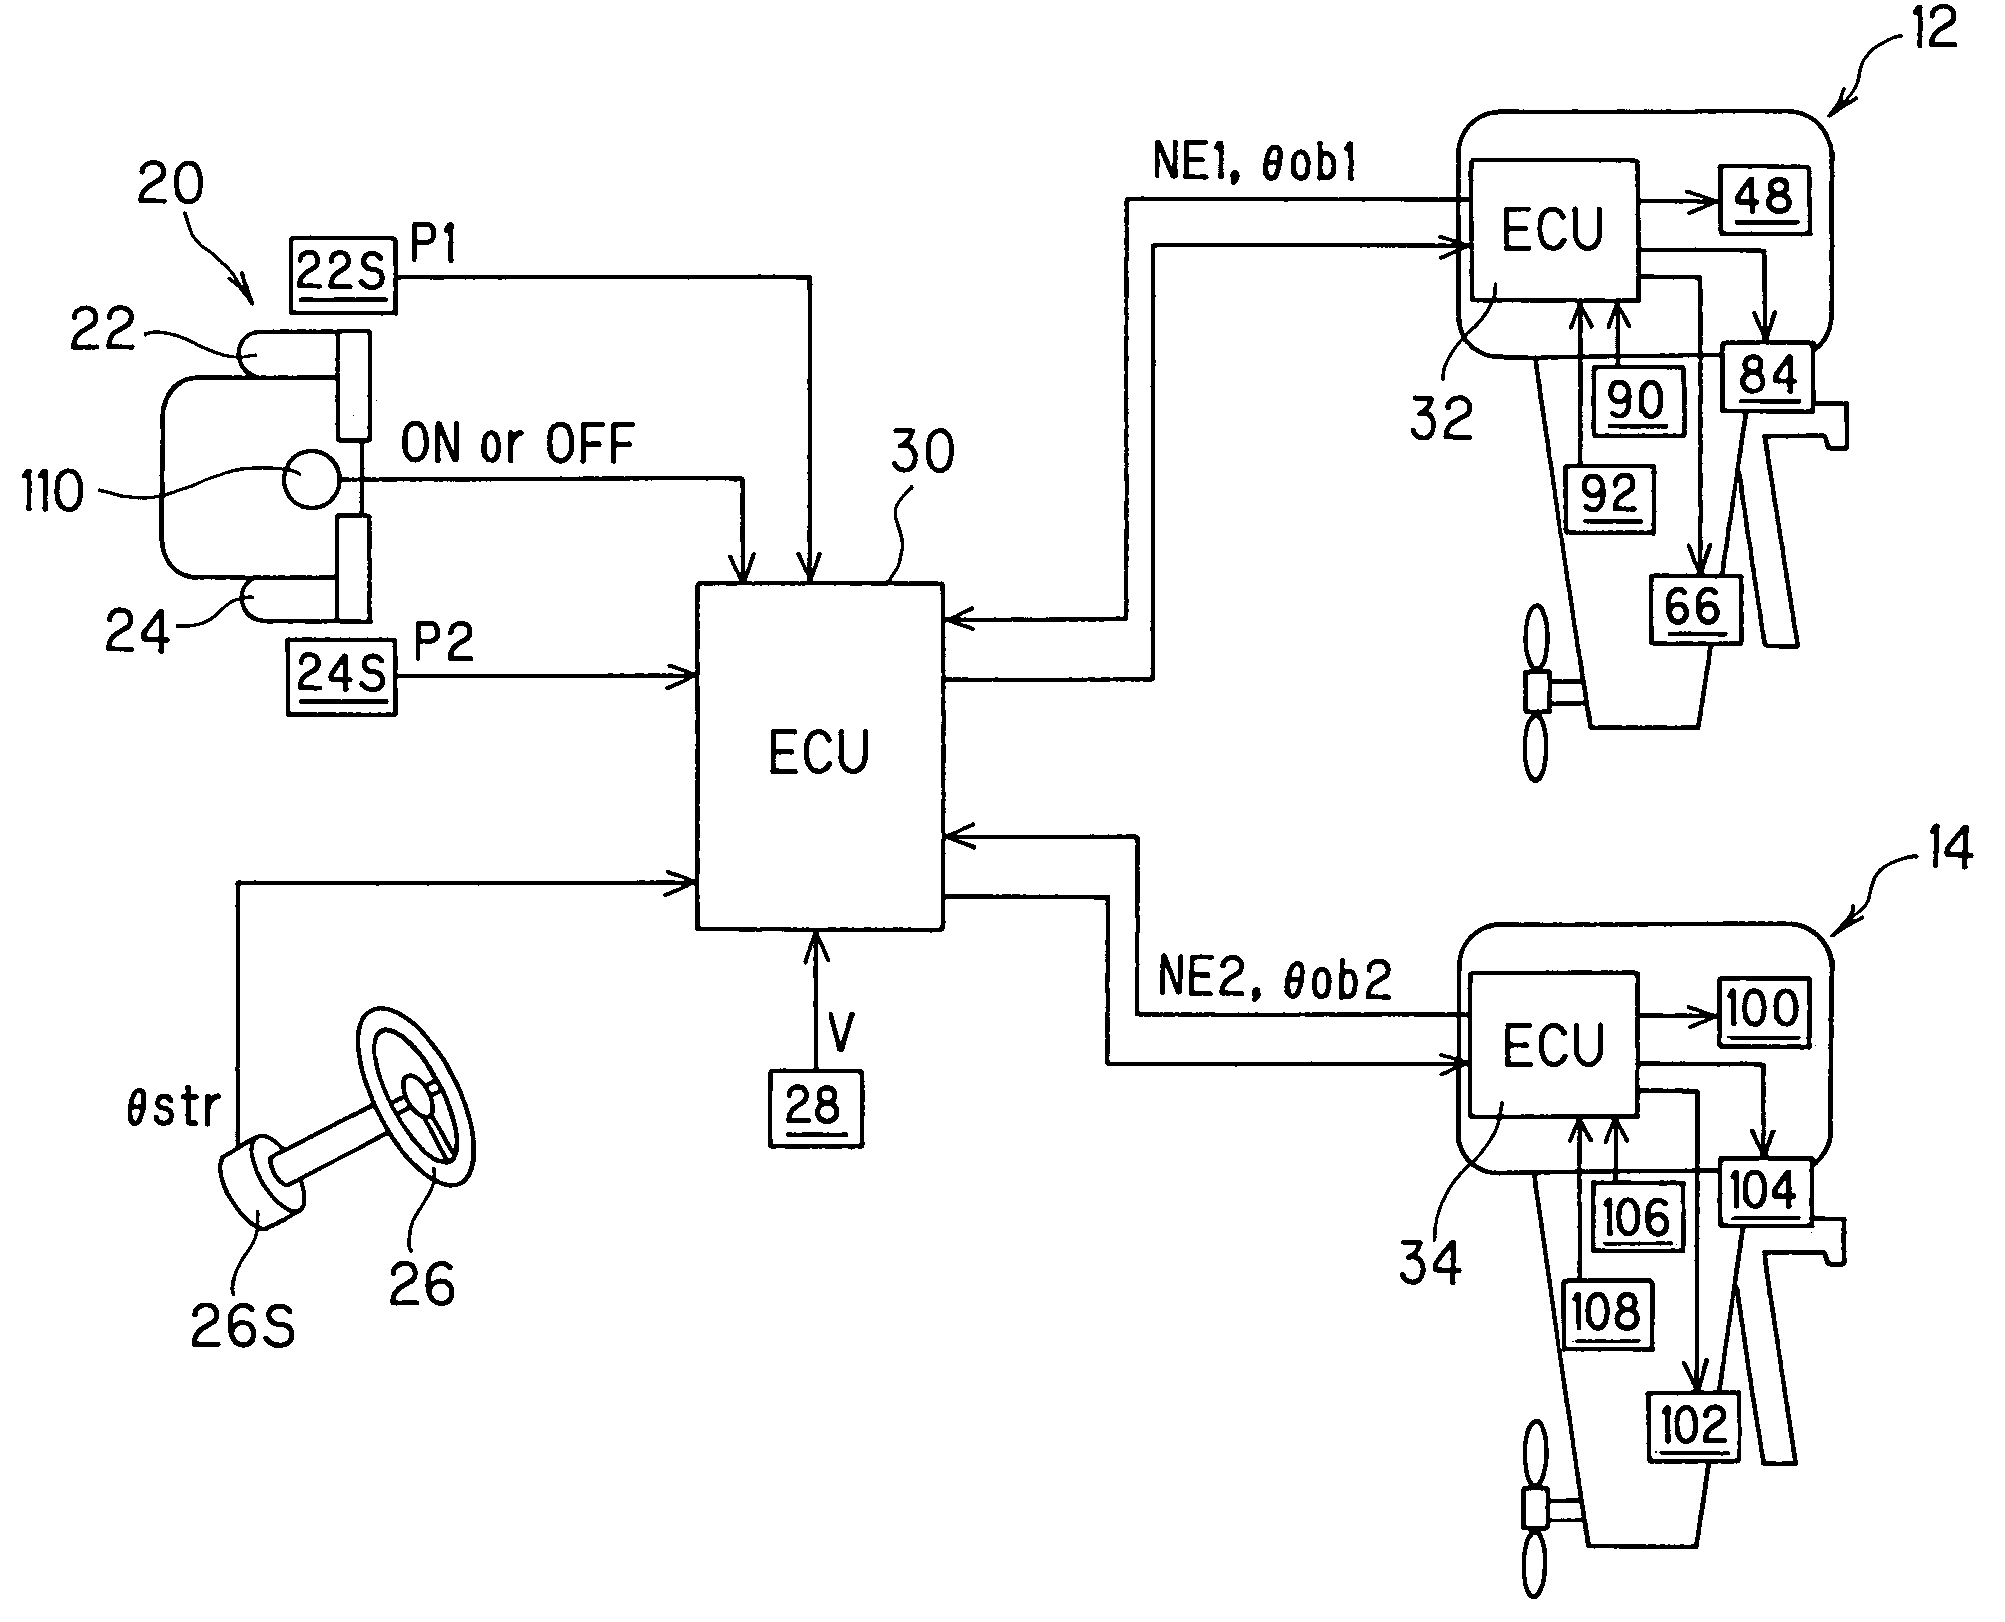 Outboard motor engine speed control system